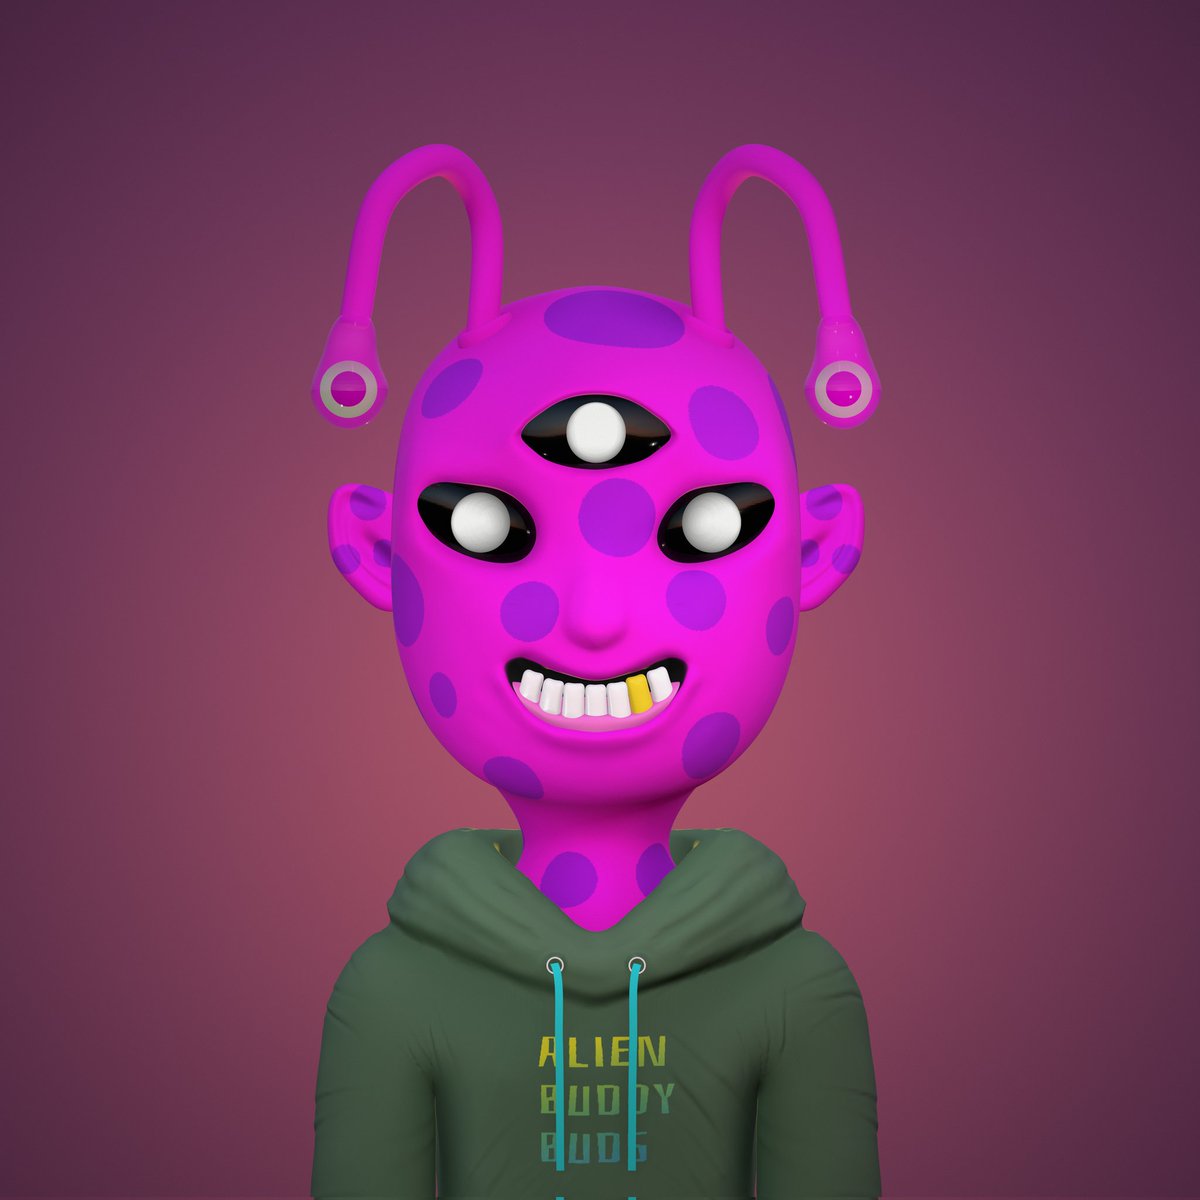 Good morning fam jason club still available item inspired by @AlienBuddyBuds price : 0.0055 link : opensea.io/assets/matic/0… do follow @AlienBuddyBuds 🥰 thankyou,have a good day 🌹